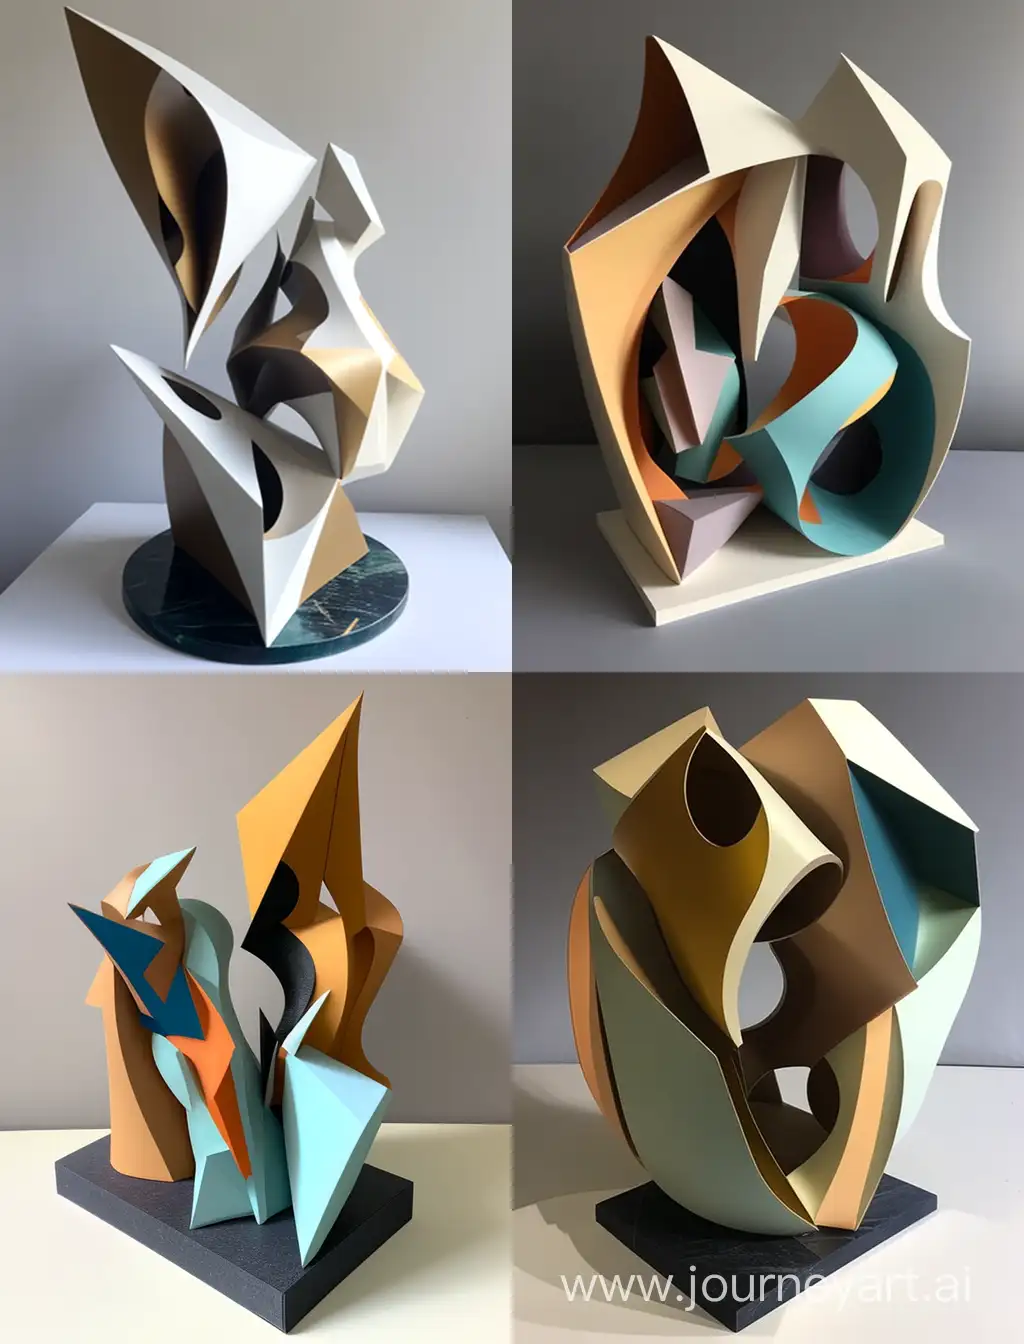 Voluminous-Geometric-Sculpture-Abstract-Forms-in-60s-Style